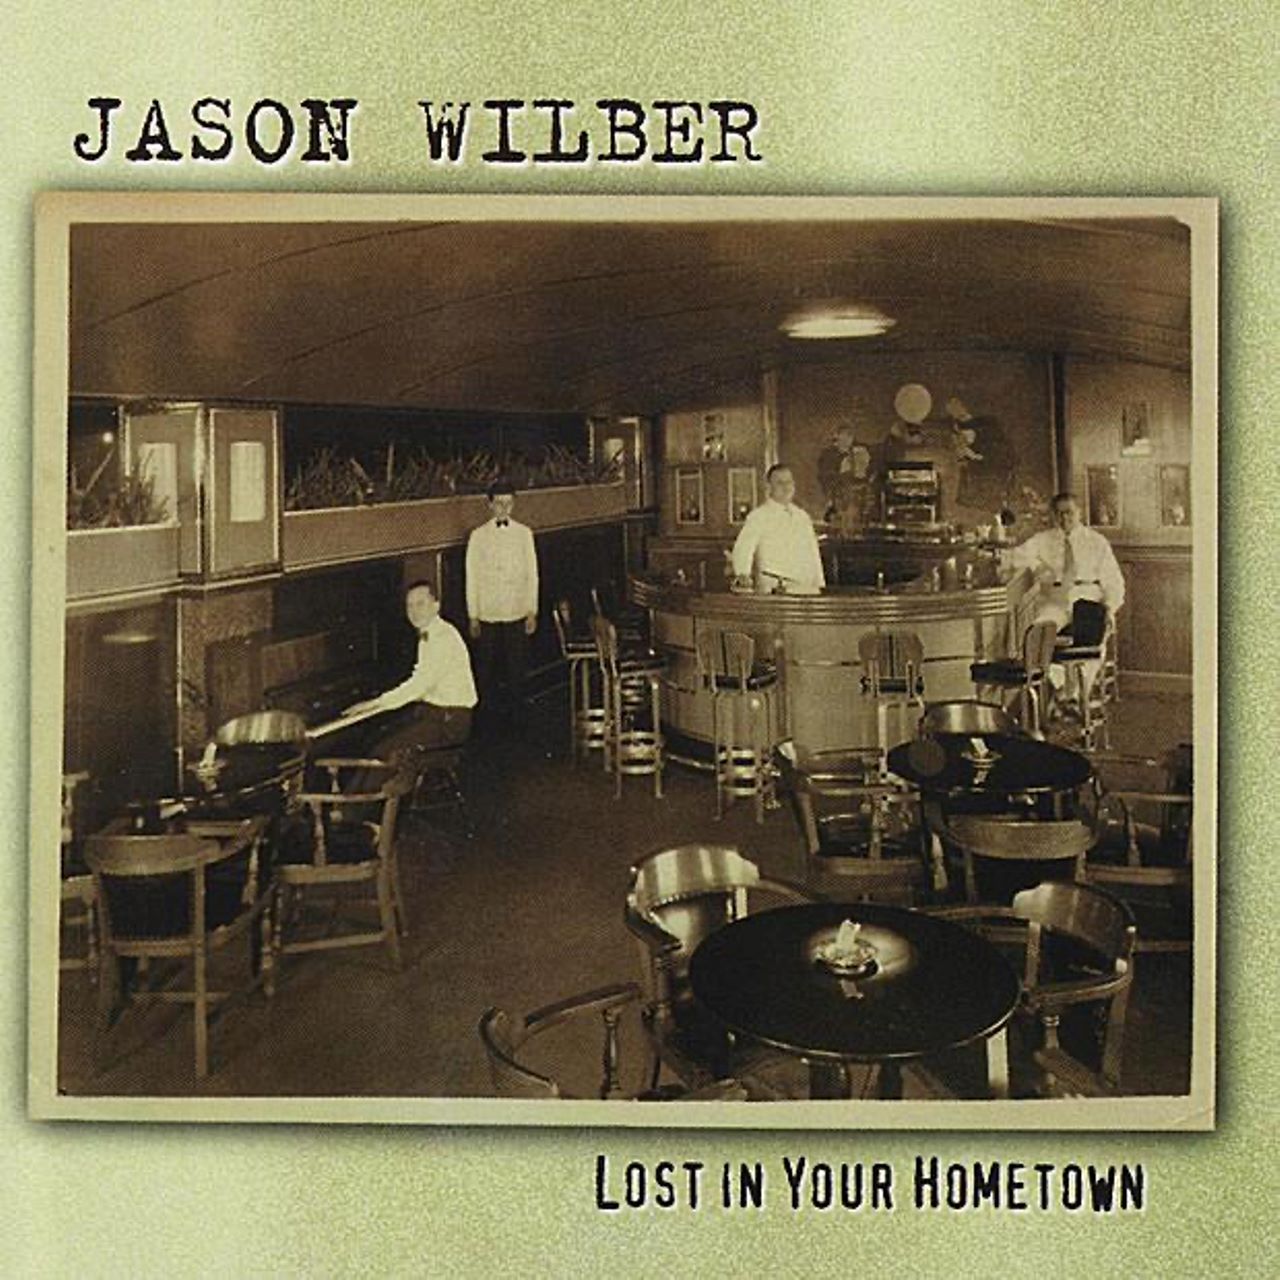 Jason Wilber - Lost In Your Hometown cover album